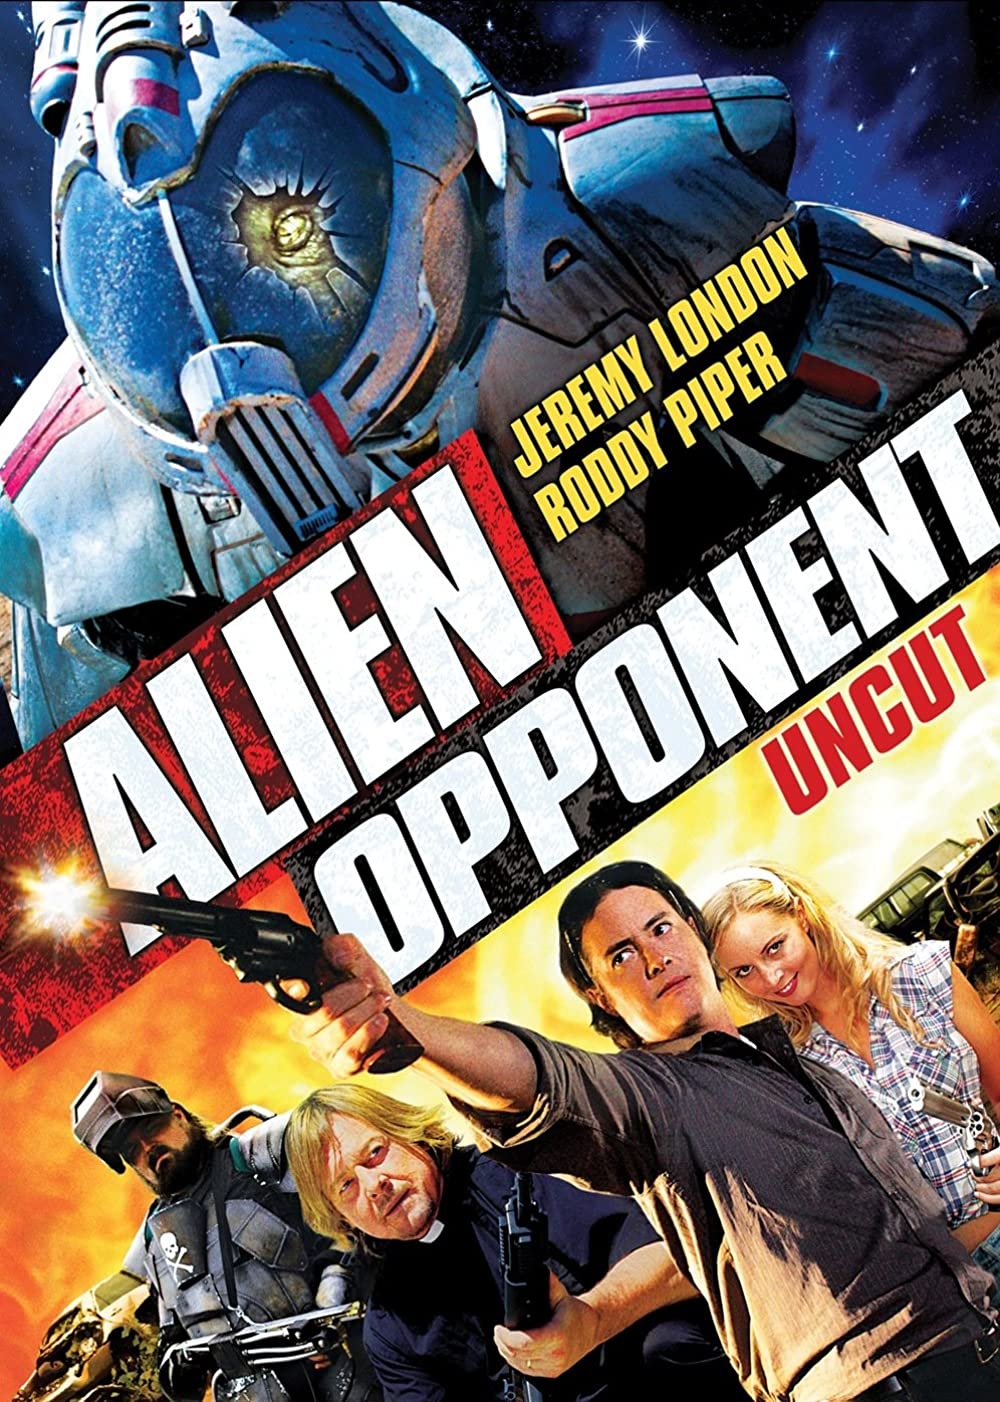 Alien Opponent 2010 Hindi ORG Dual Audio 480p UNCUT BluRay 315MB Download